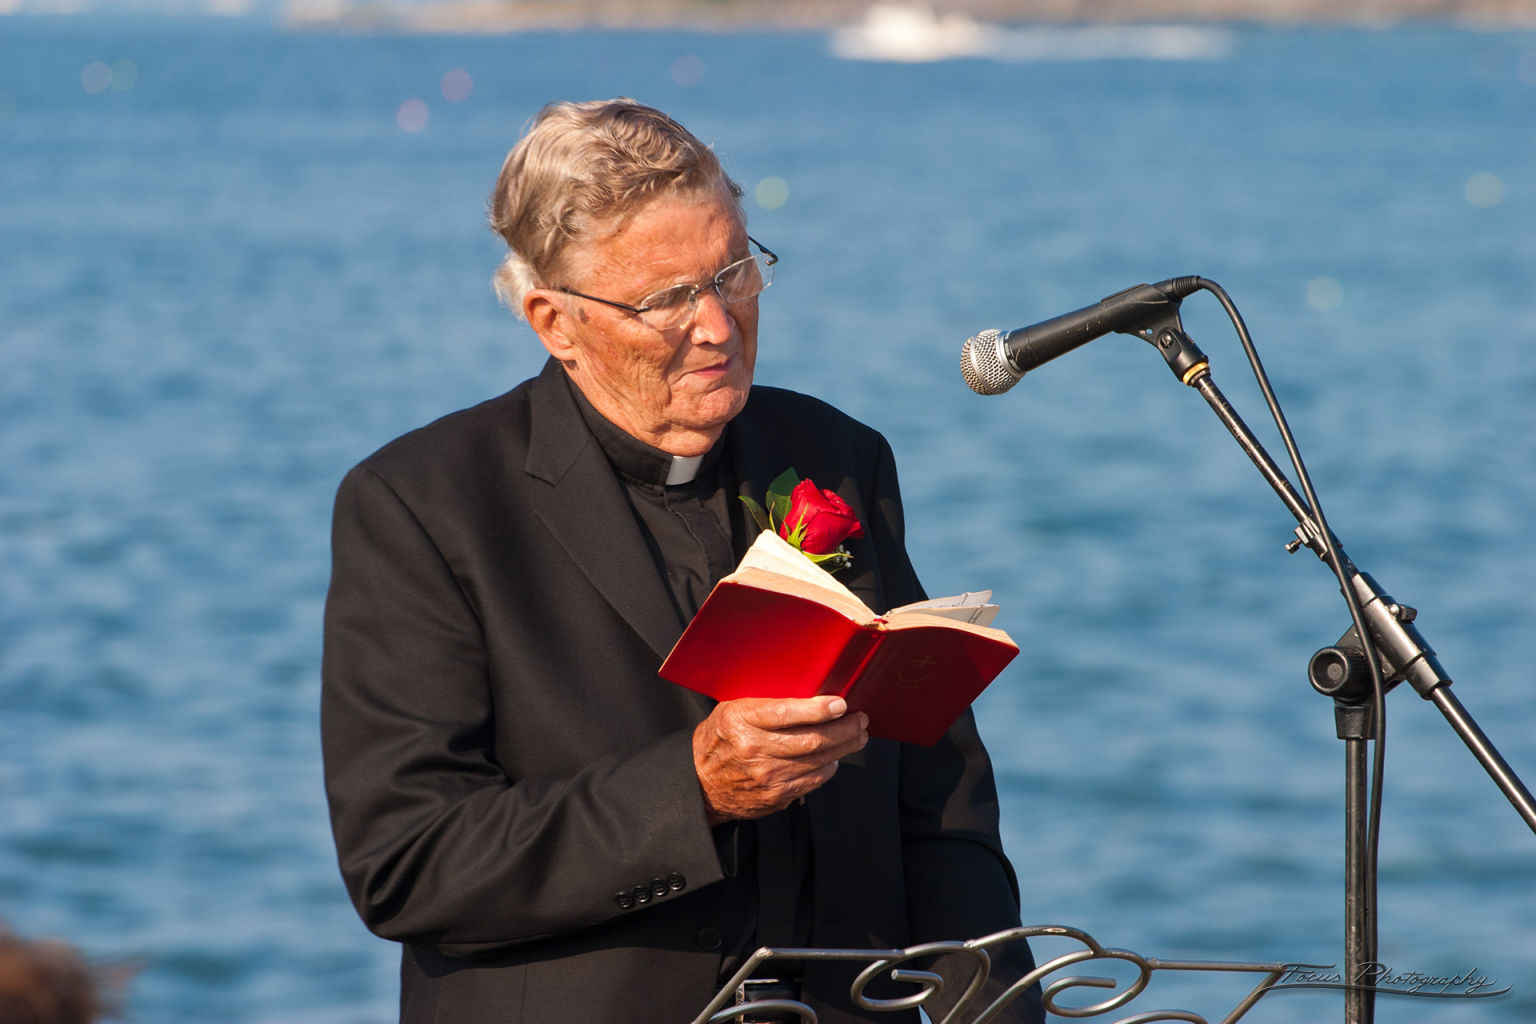 Minister reading at Maine wedding